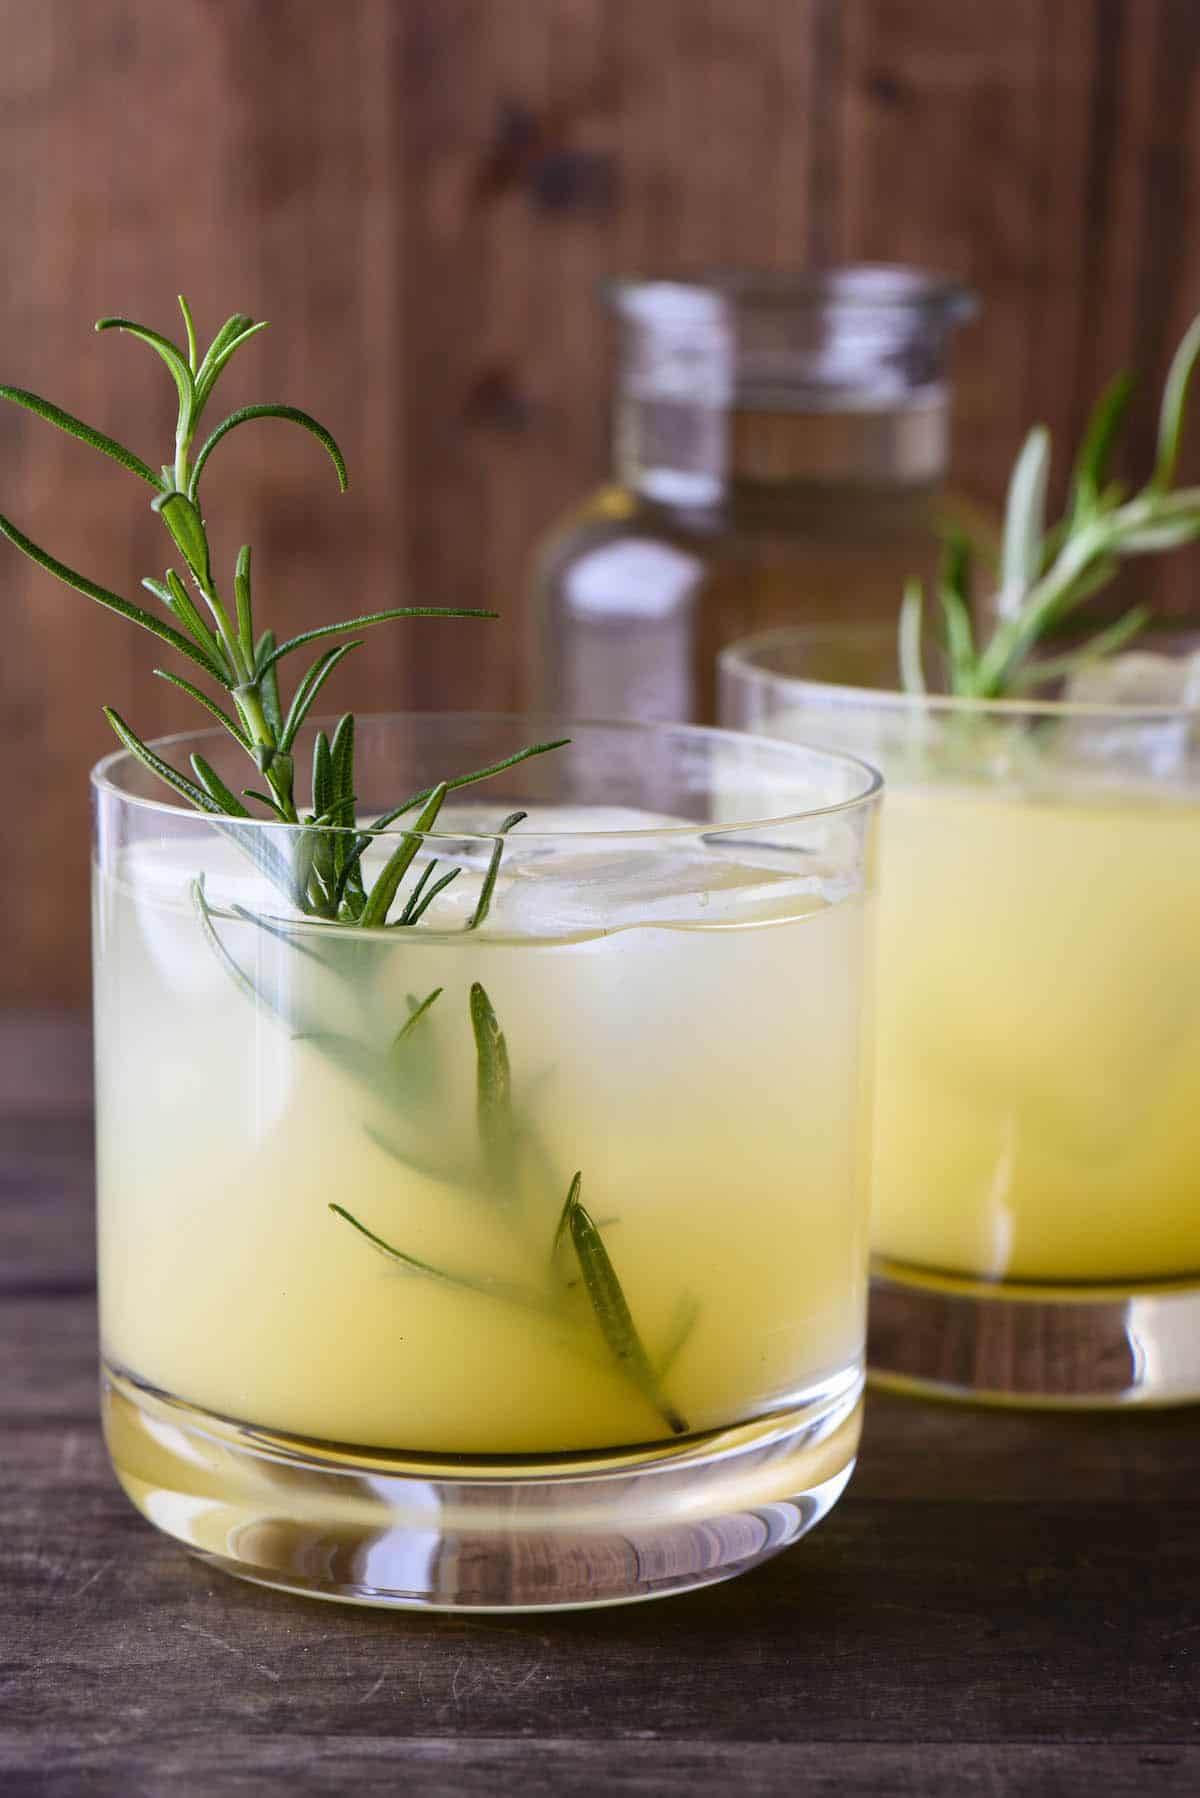 Orange hued cocktail in small glass with a rosemary sprig garnish.